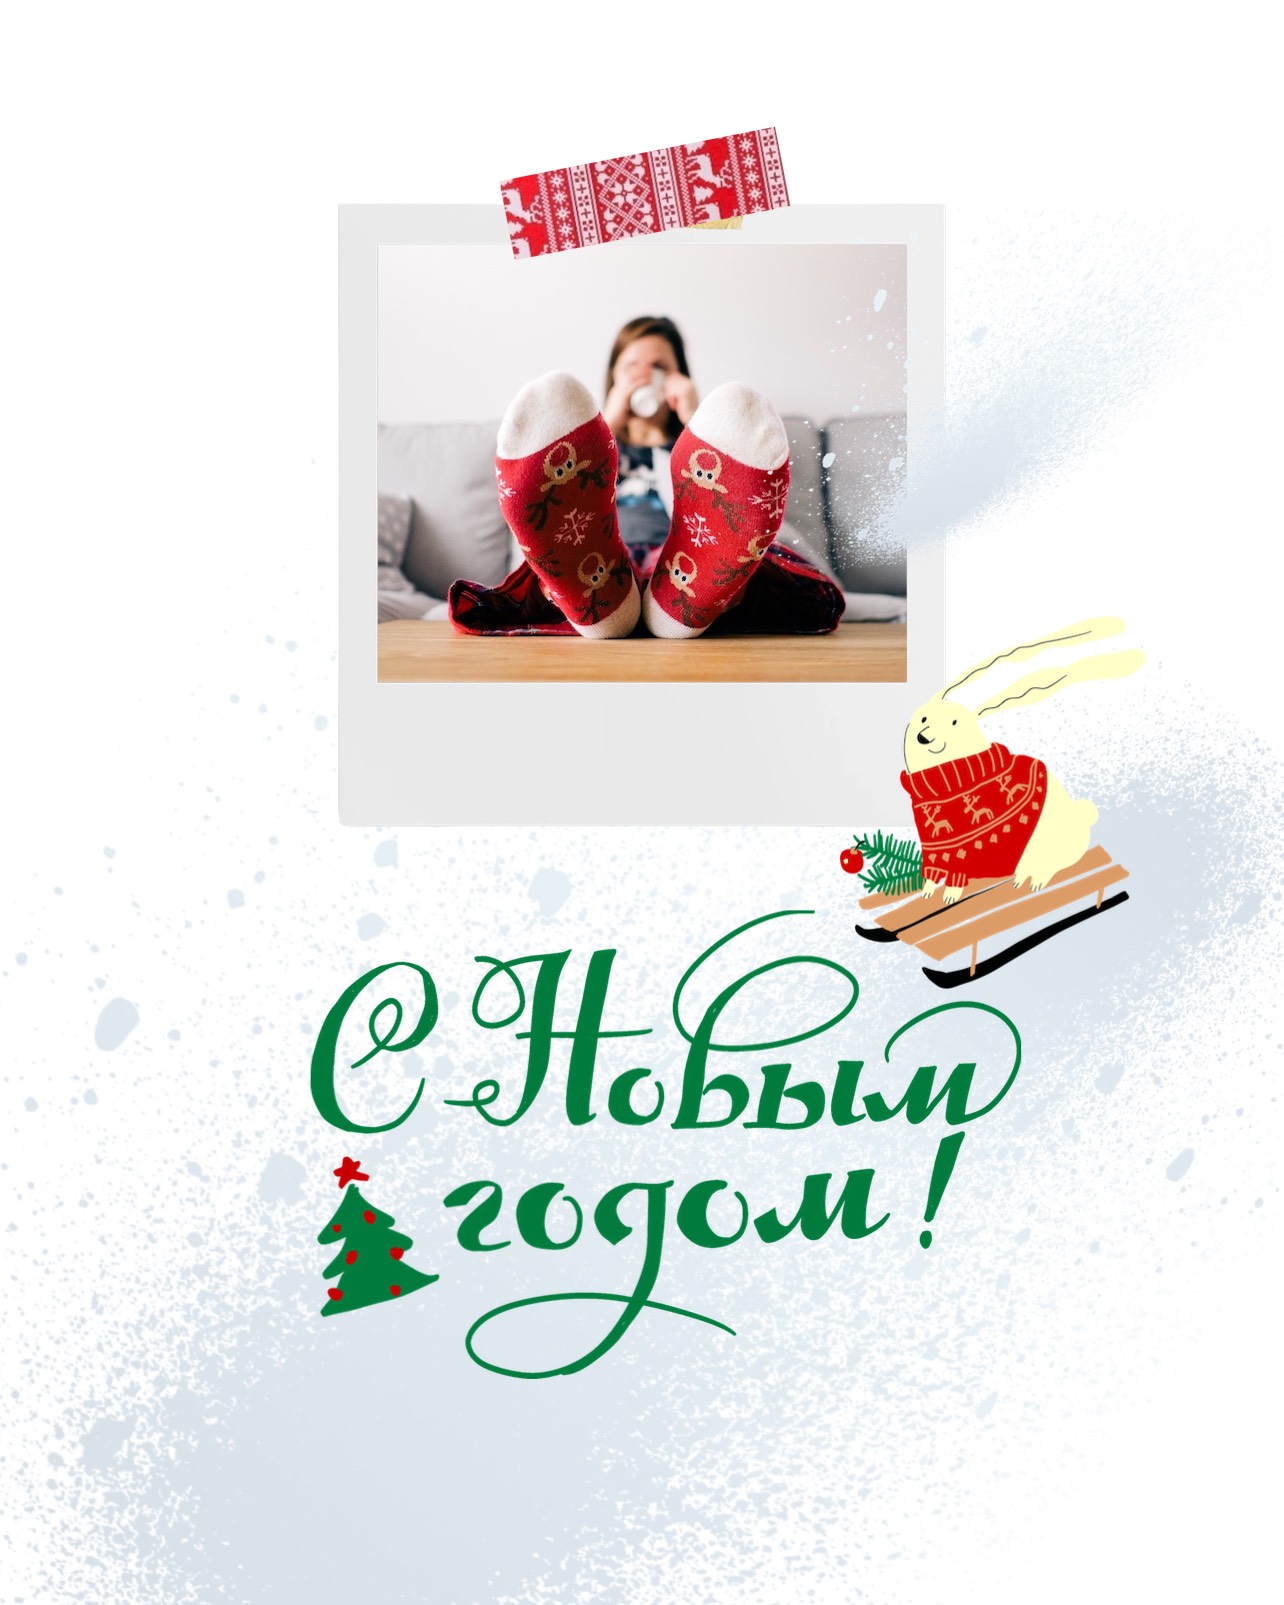 A Christmas Card With A Picture Of A Woman In Red Boots Template